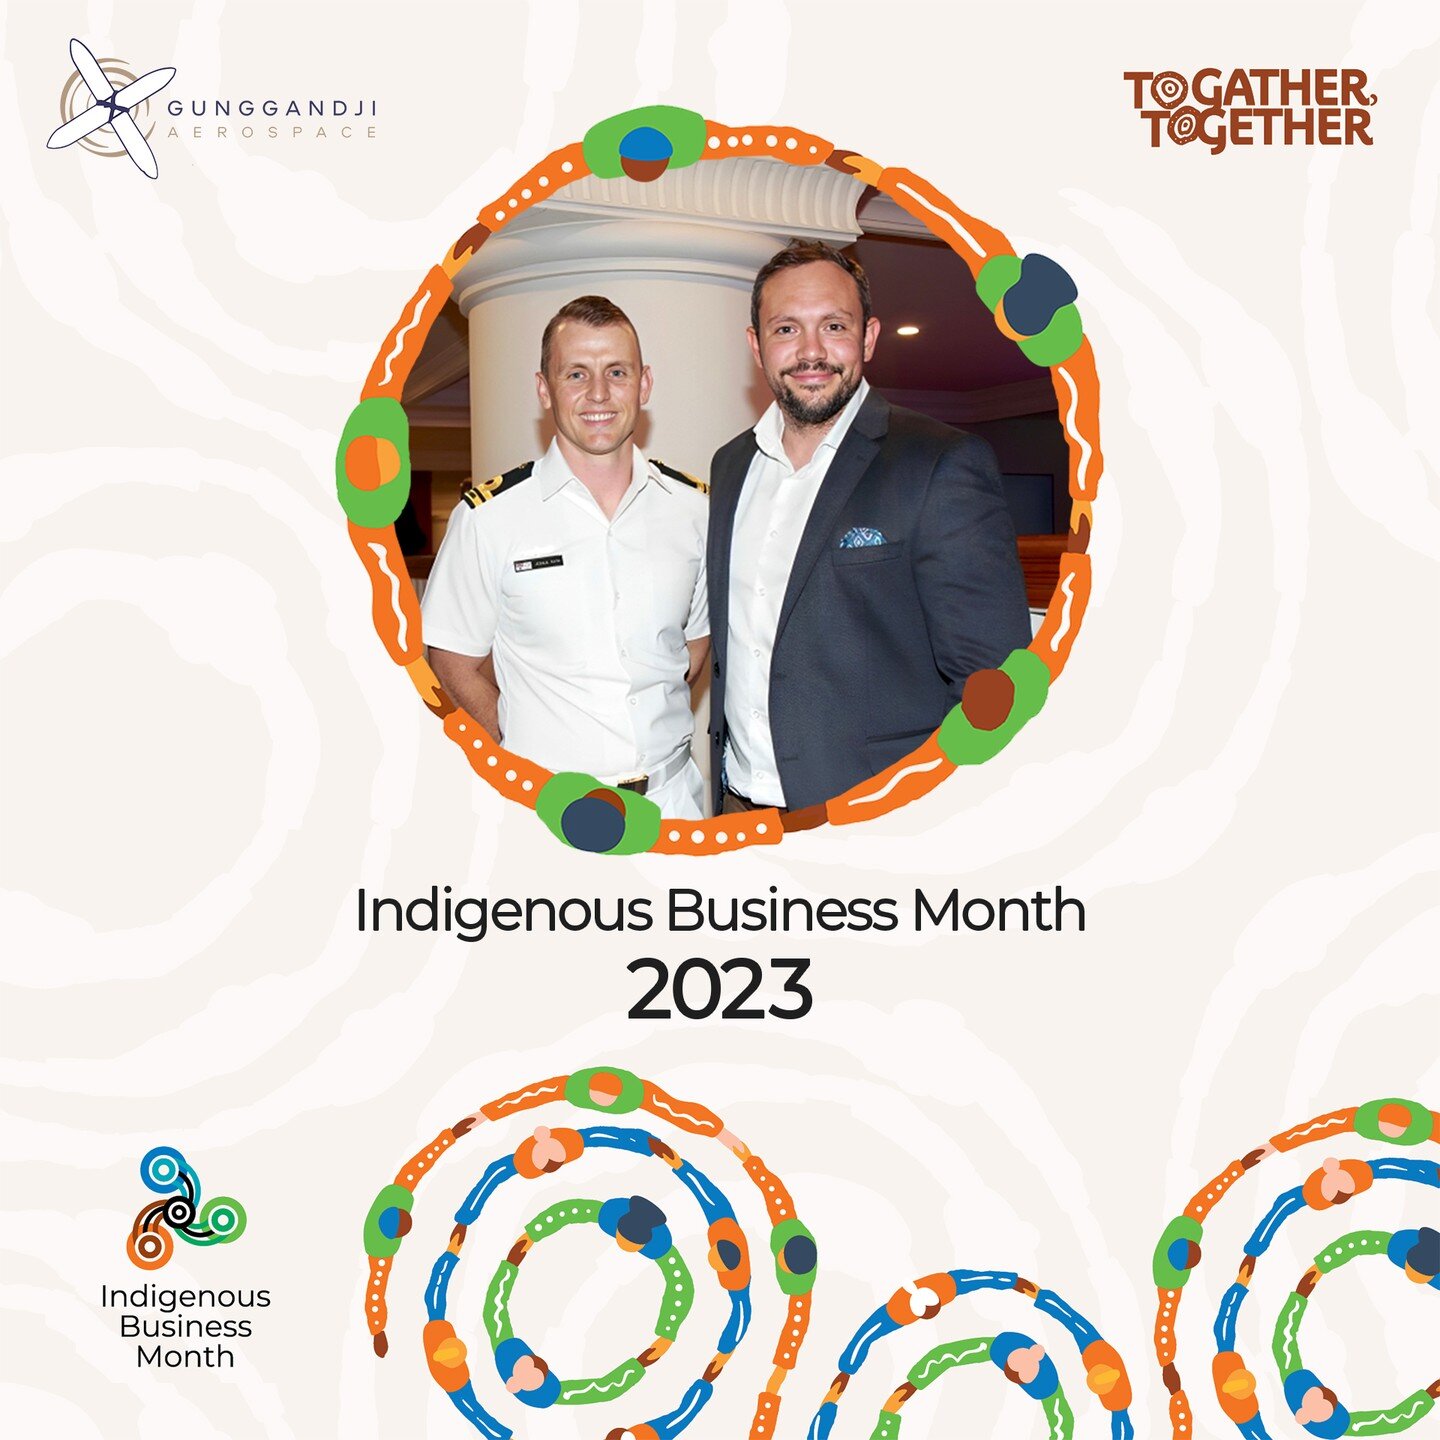 Indigenous businesses have brought about positive change and created opportunities in many communities, showcasing the resilience, strength and determination of First Nations people.
 
Gunggandji Aerospace, Australia's first and only Indigenous-owned